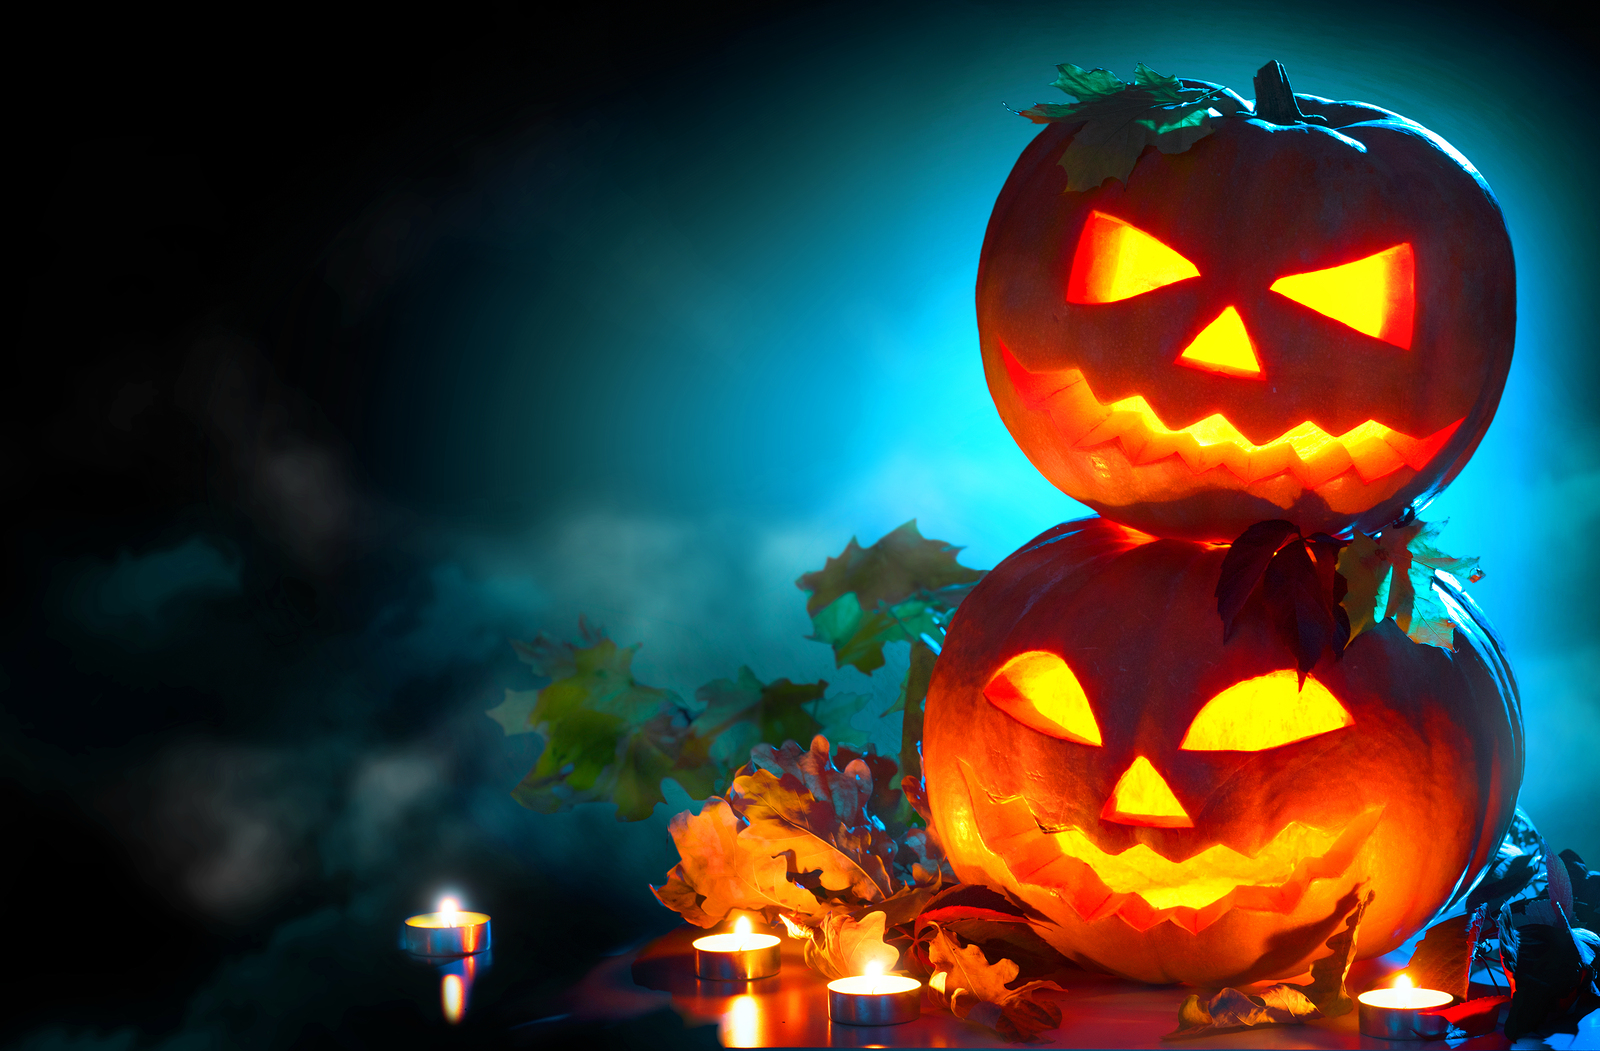 Top 3 Places For A Spooky Holiday This Halloween